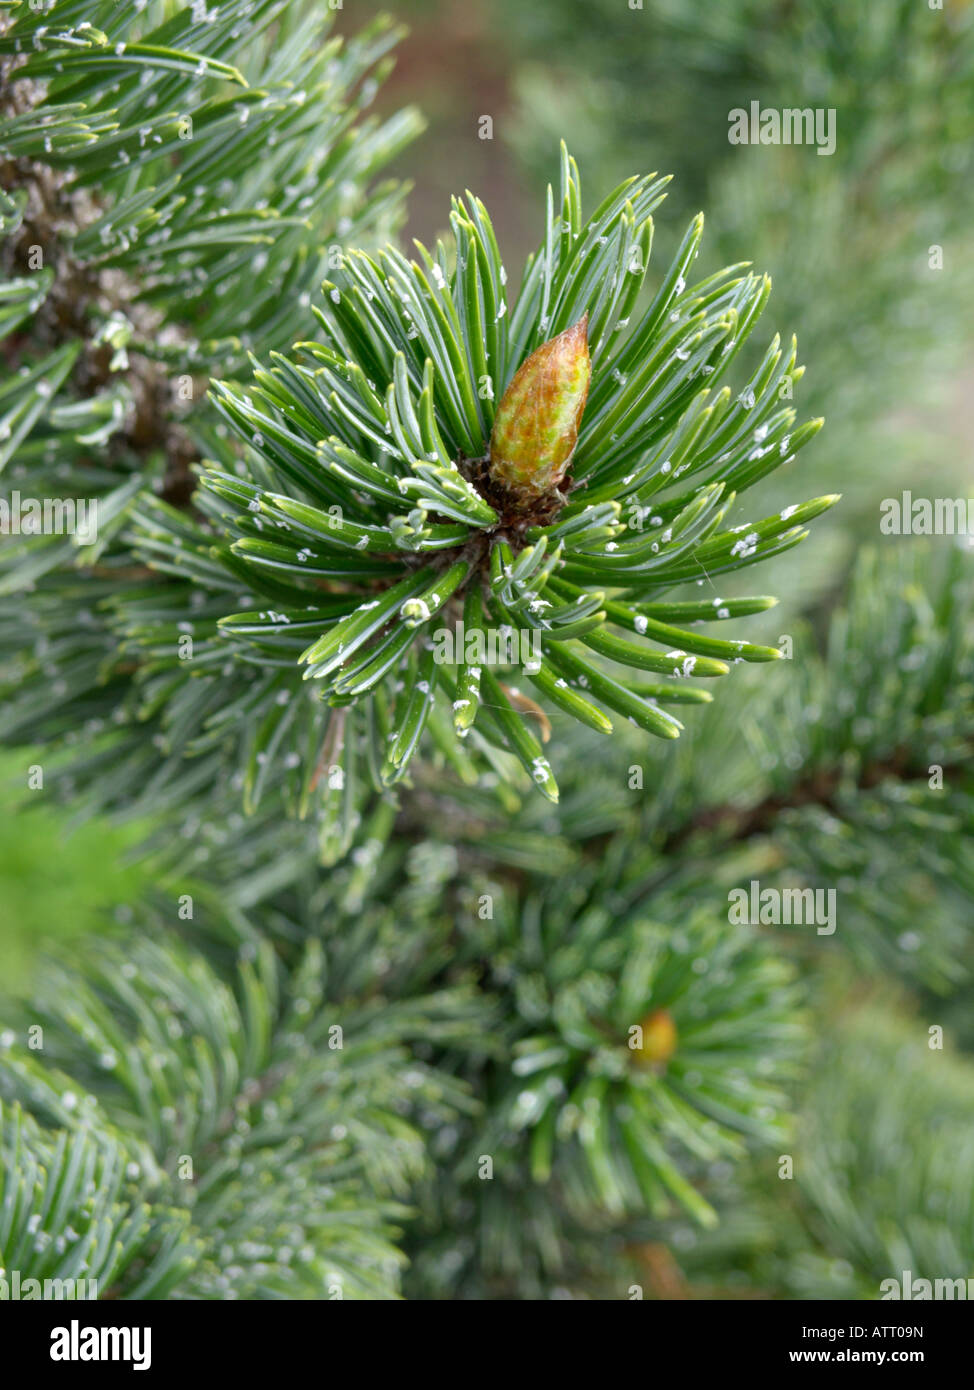 Bistlecone pin (Pinus aristata) Banque D'Images